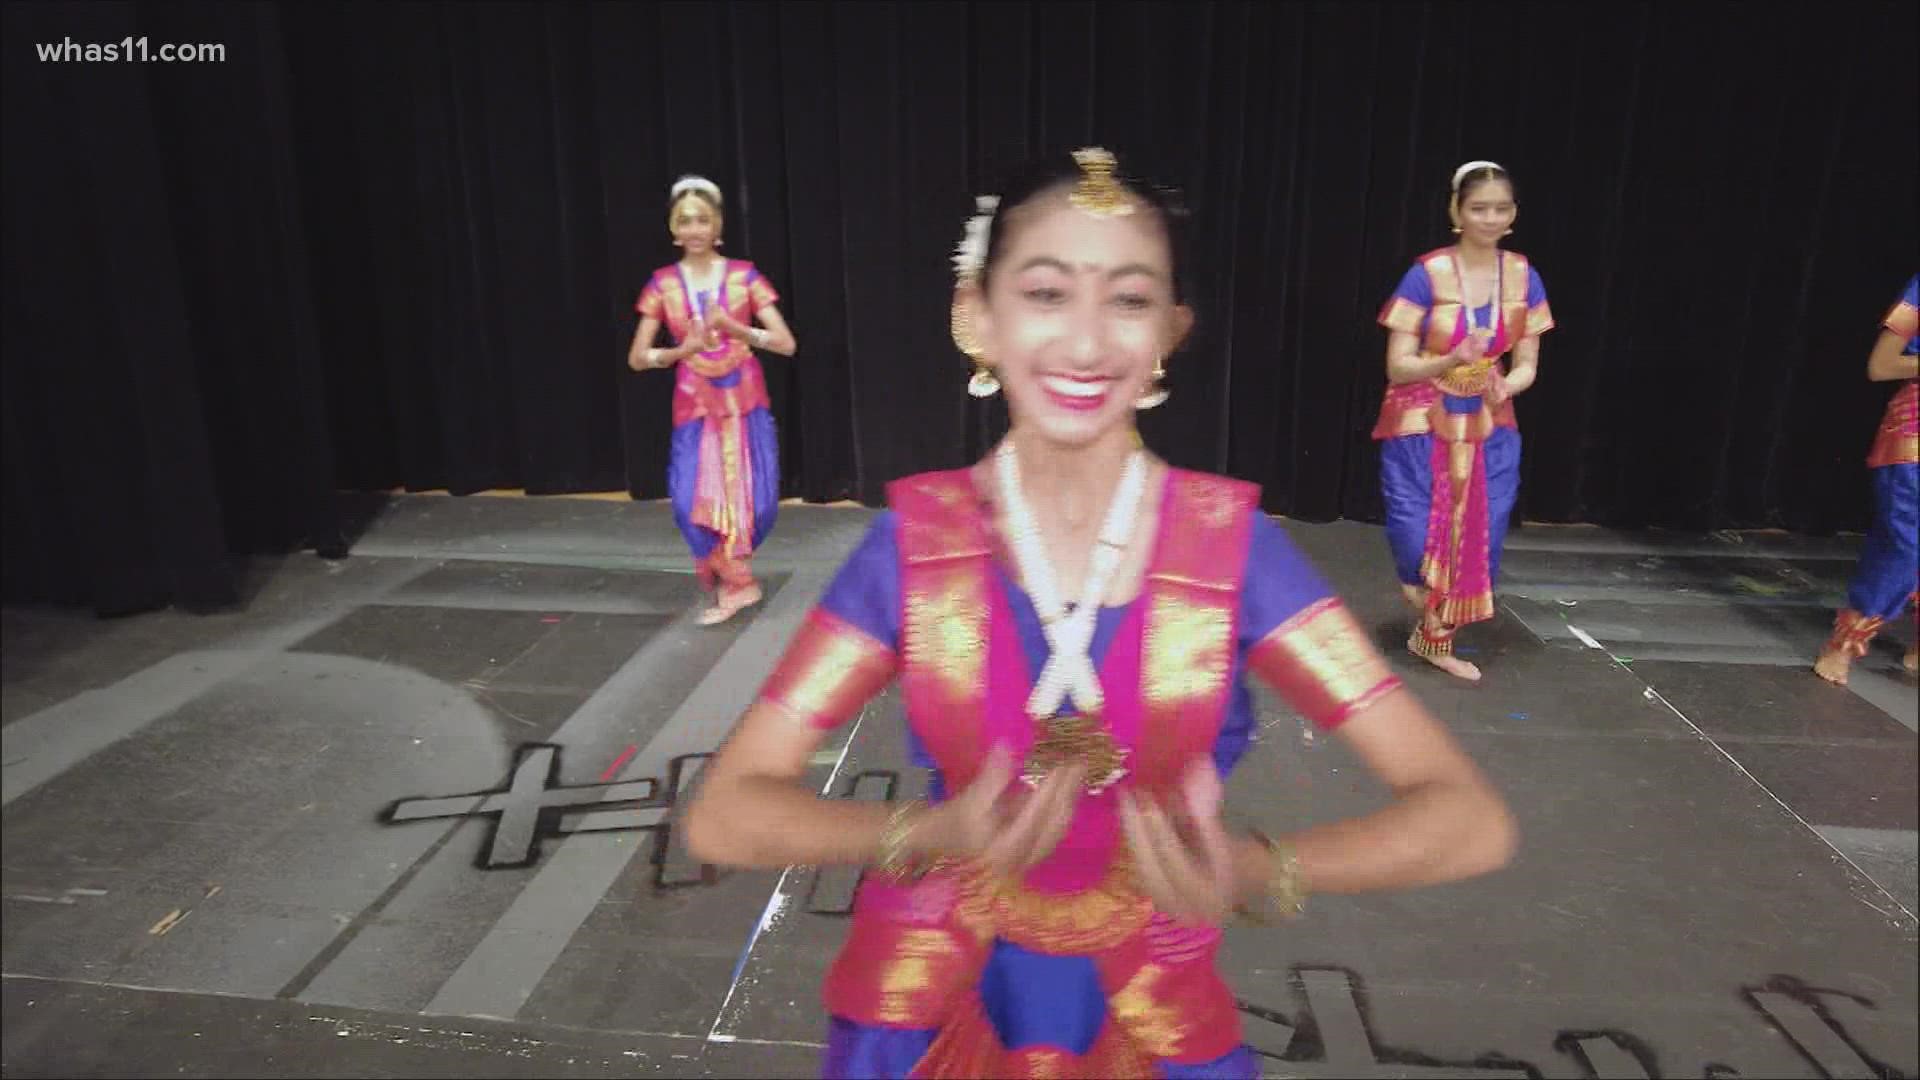 The academy has held a special recital to not only share the rich tradition and culture of Indian dance with the community but raise money for the Crusade.